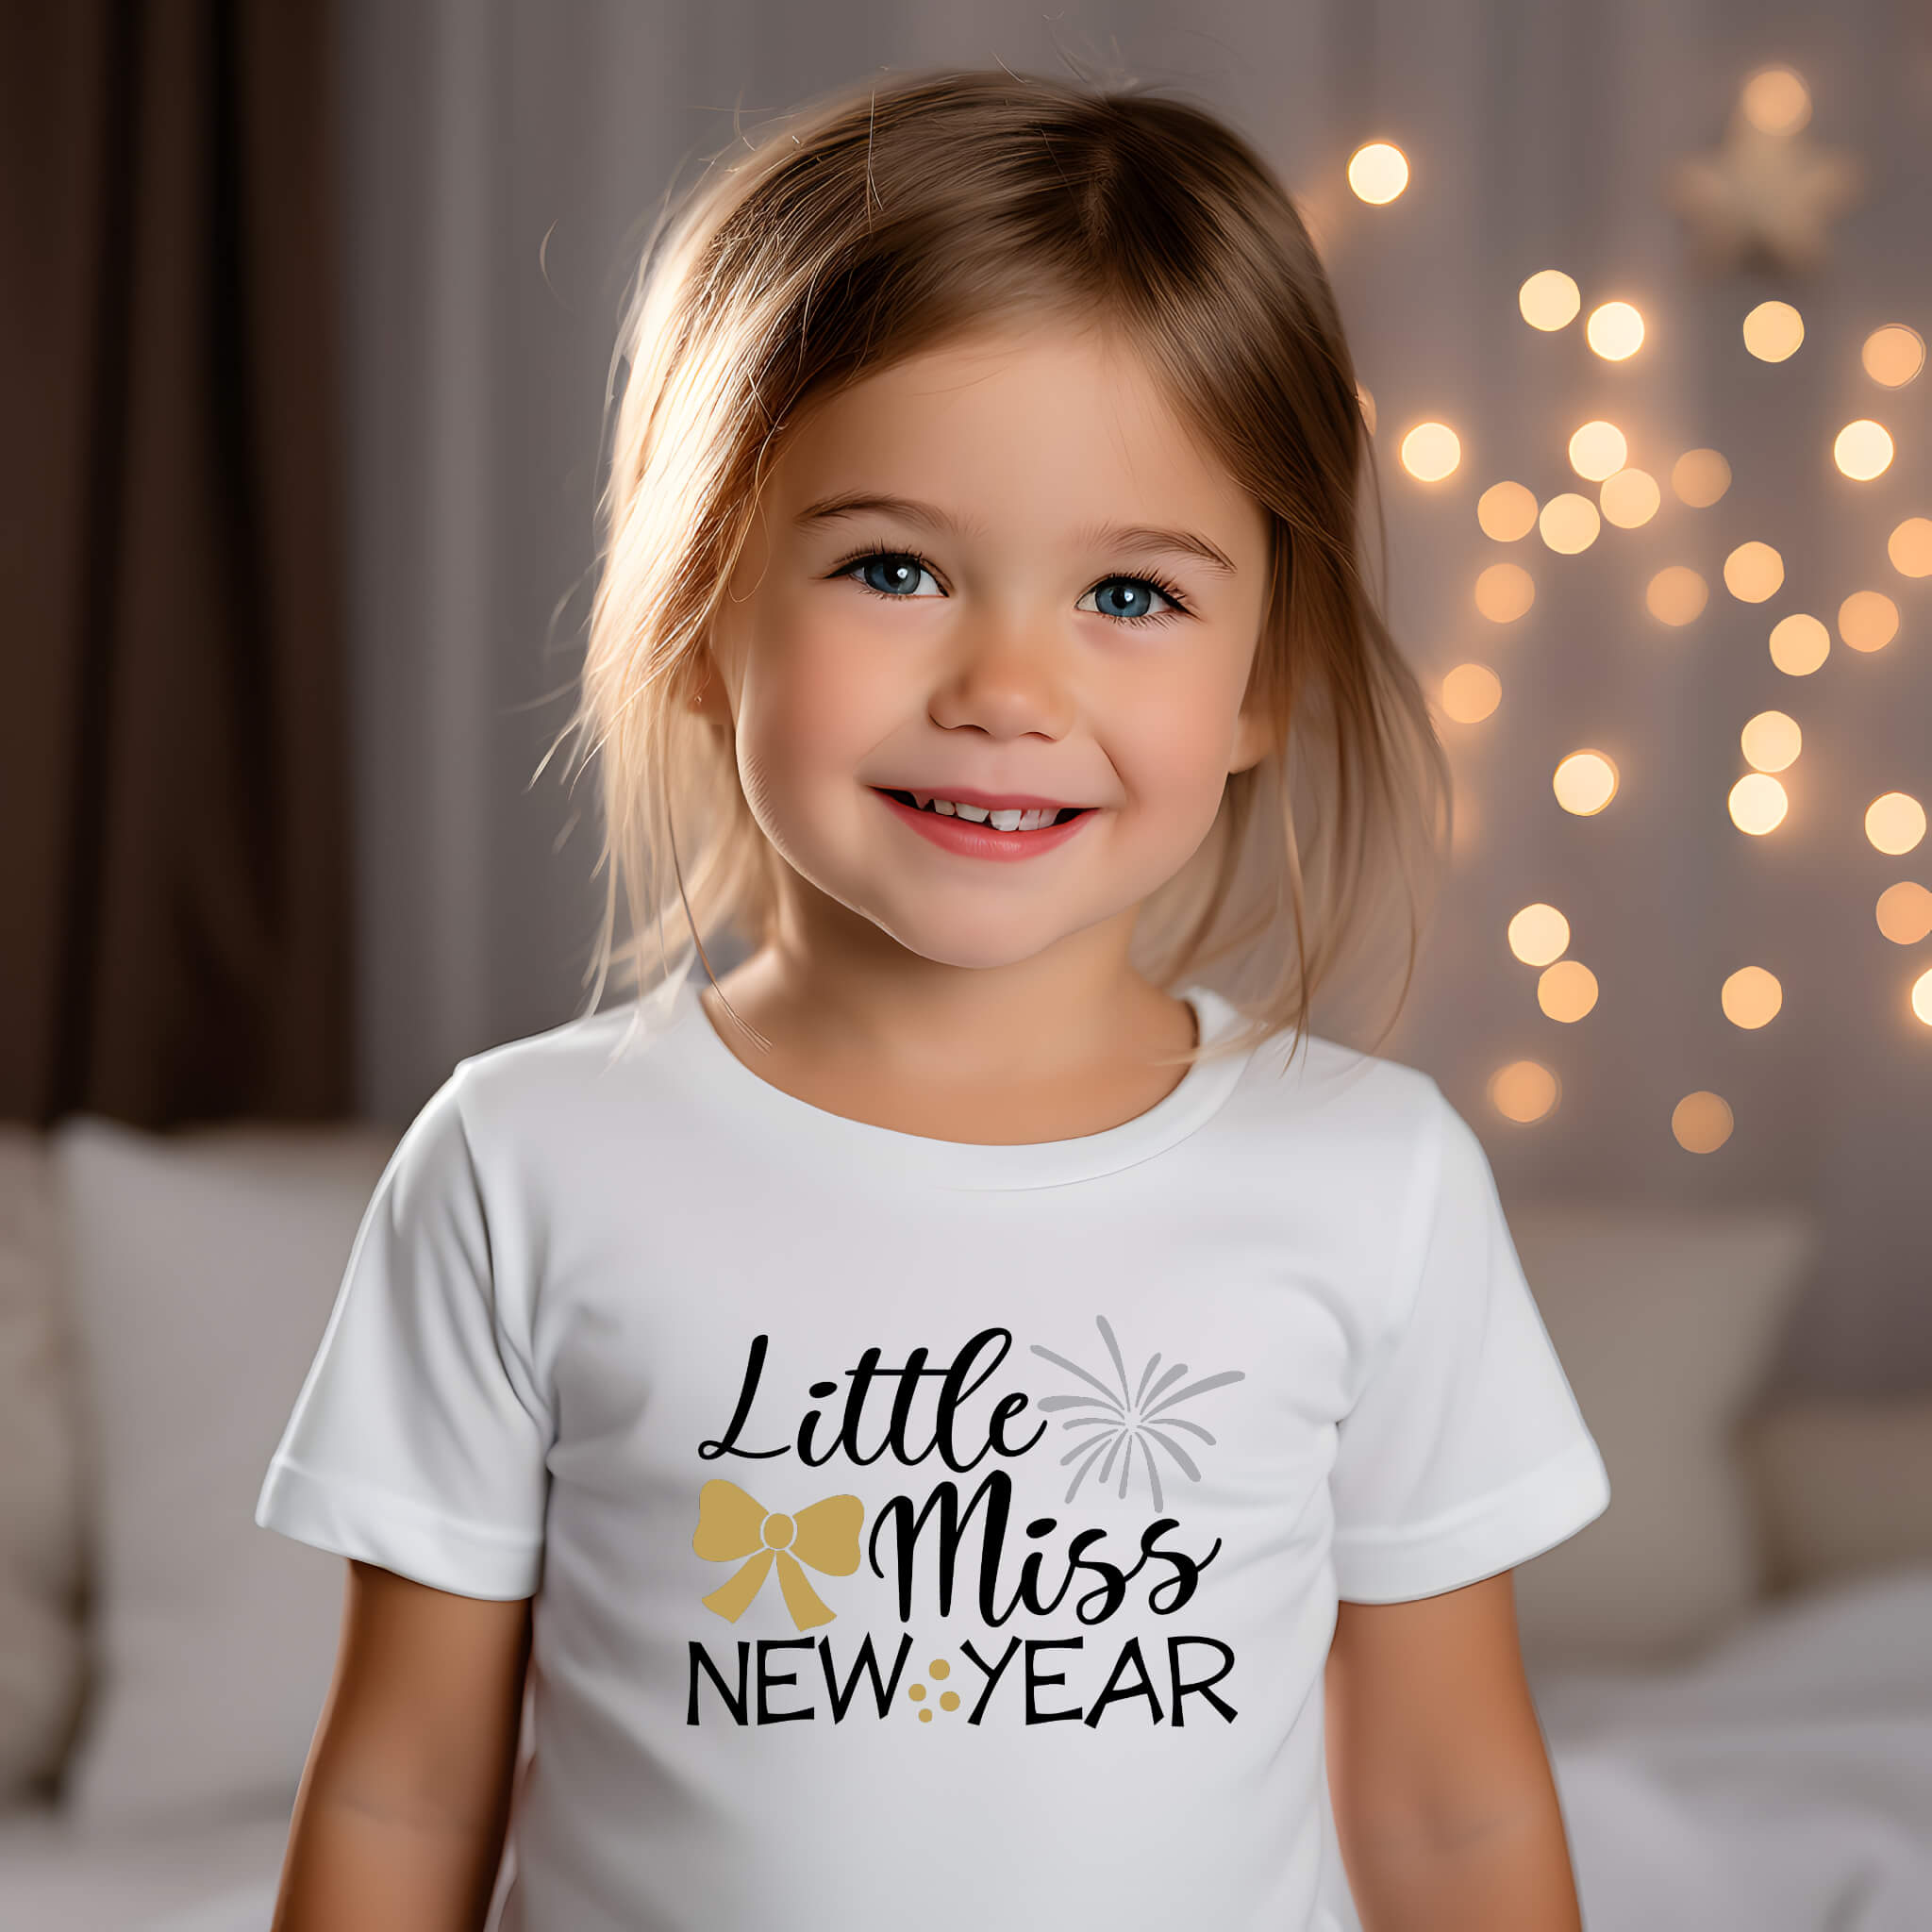 New Year's Fancy Little Miss New Year Baby Girl's Onesie Graphic Print T-Shirt